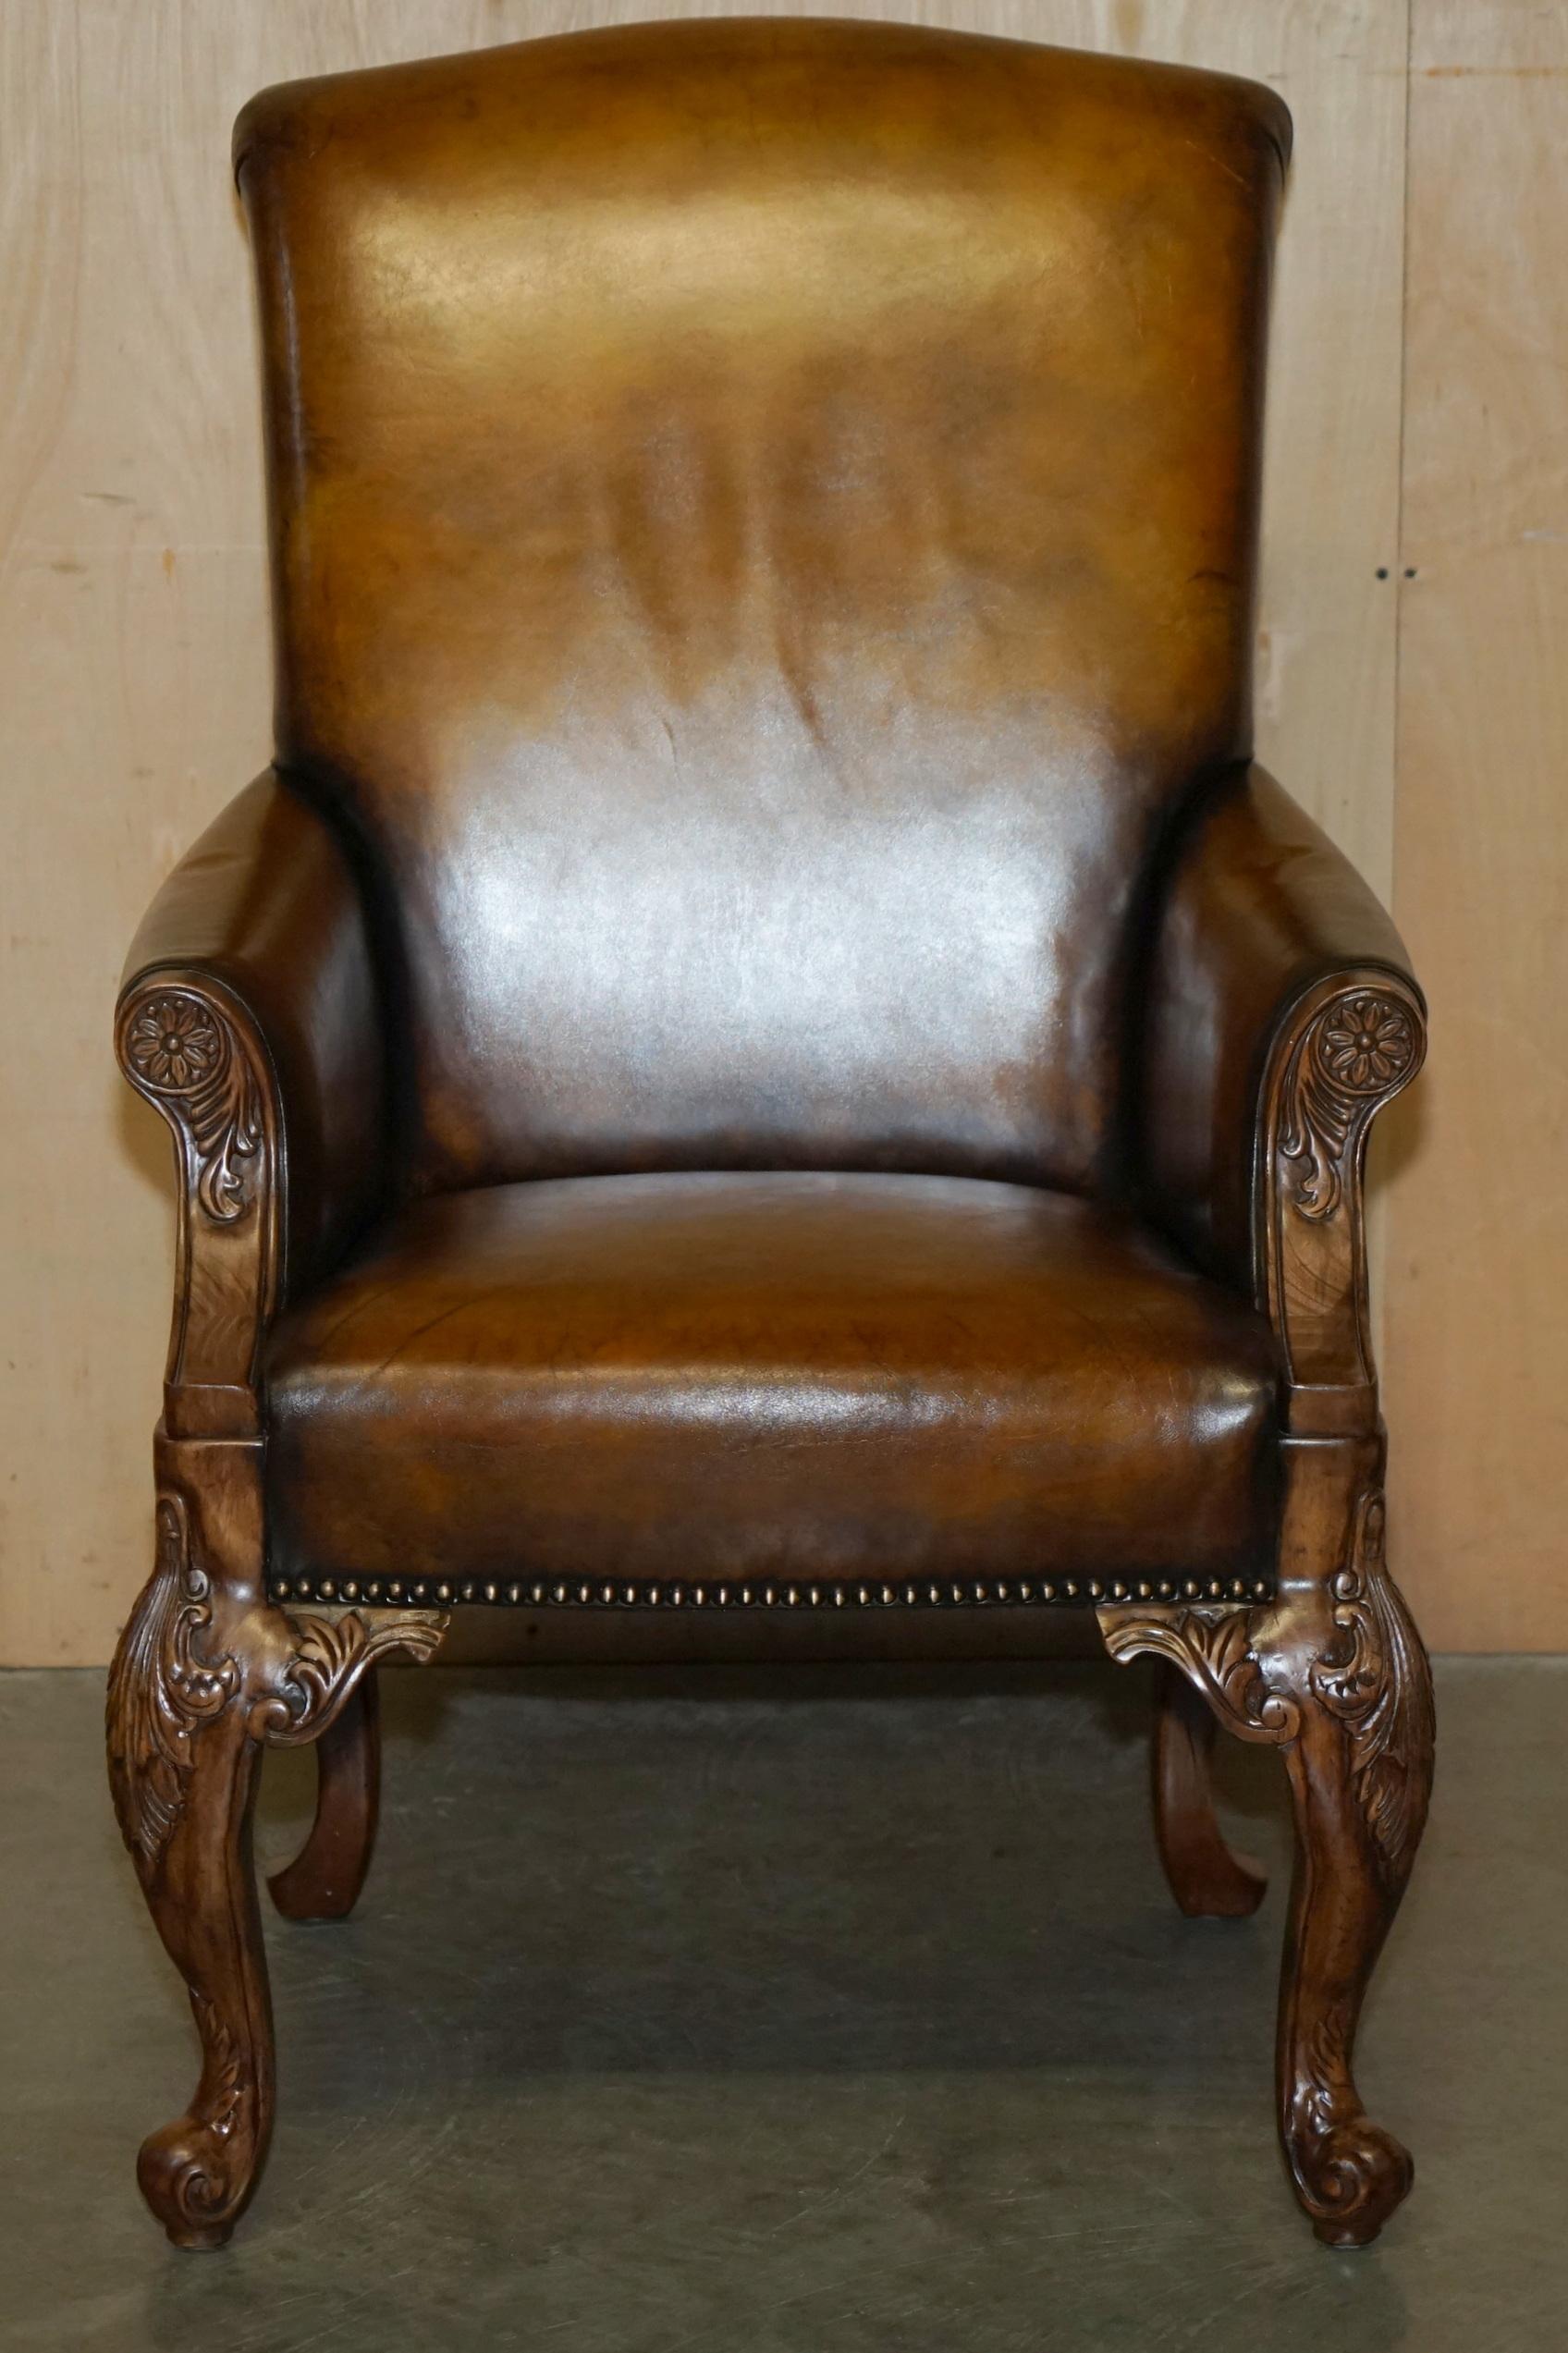 PAIR OF ANTIQUE HEAVILY CARved HAND DYED BROWN LEATHER RESTORED THRONE ARMCHAIRs (Regency) im Angebot